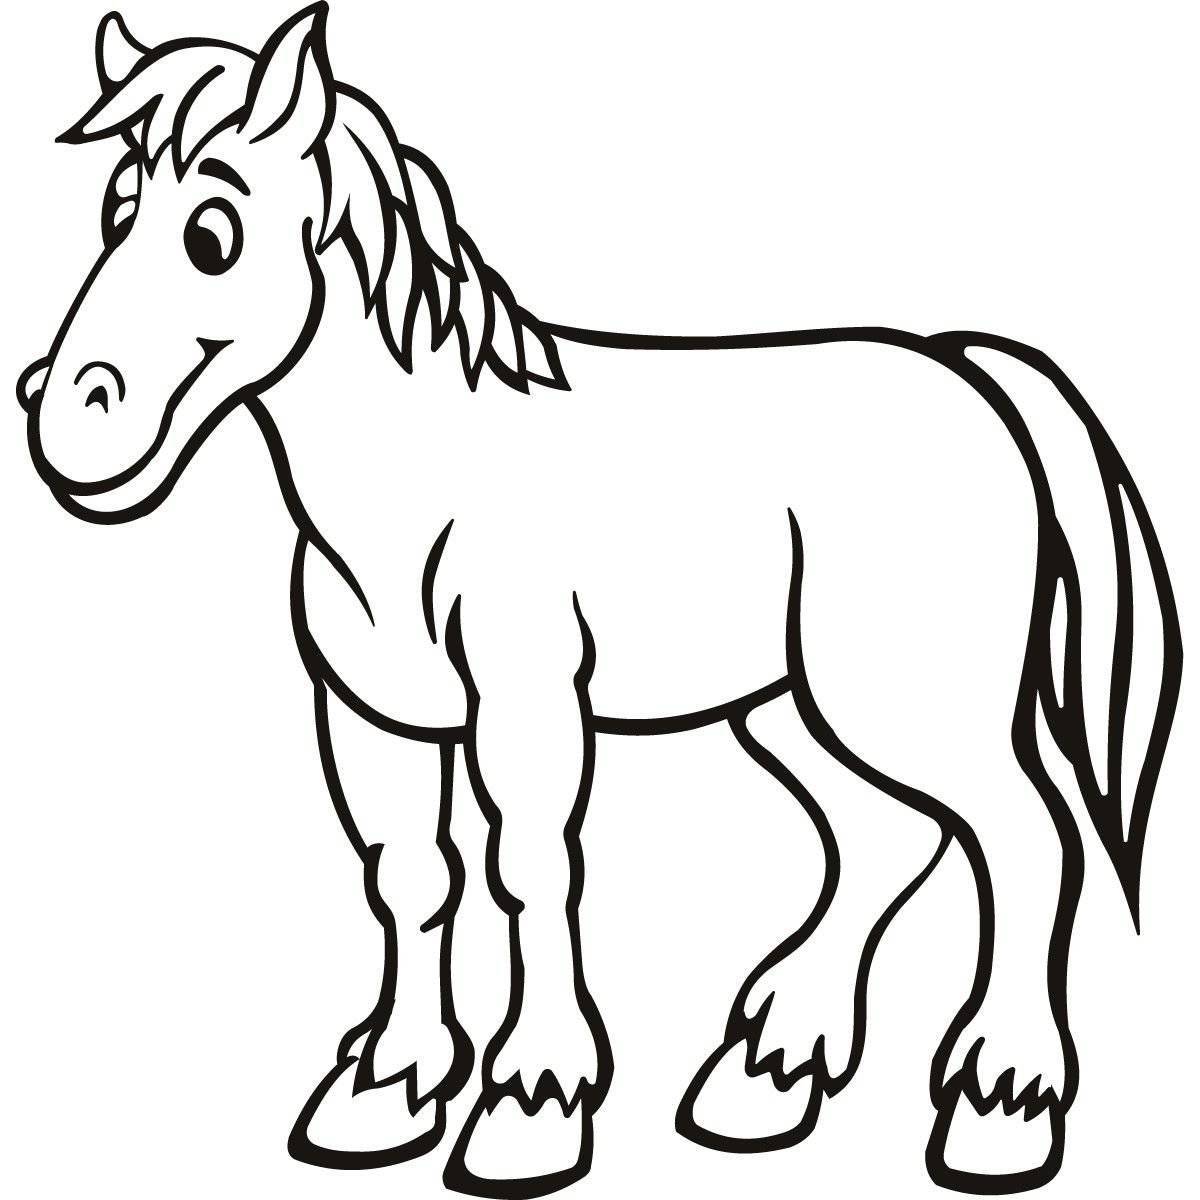 Fancy horse coloring book for 3-4 year olds